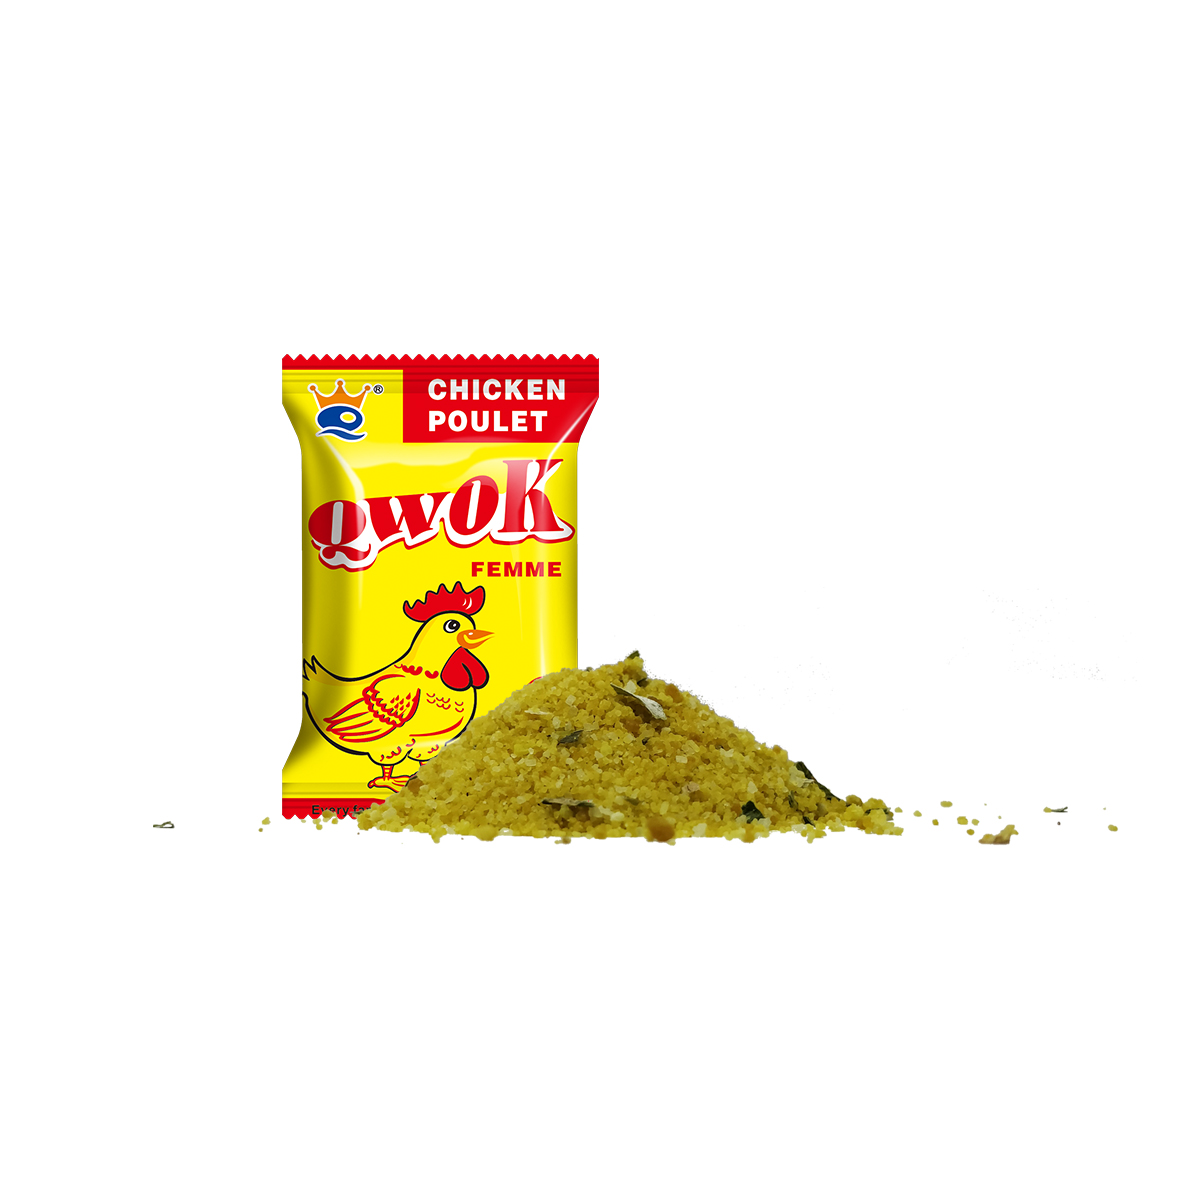 HALAL 10g chicken flavour Seasoning Powder for healthy home cooking with low price